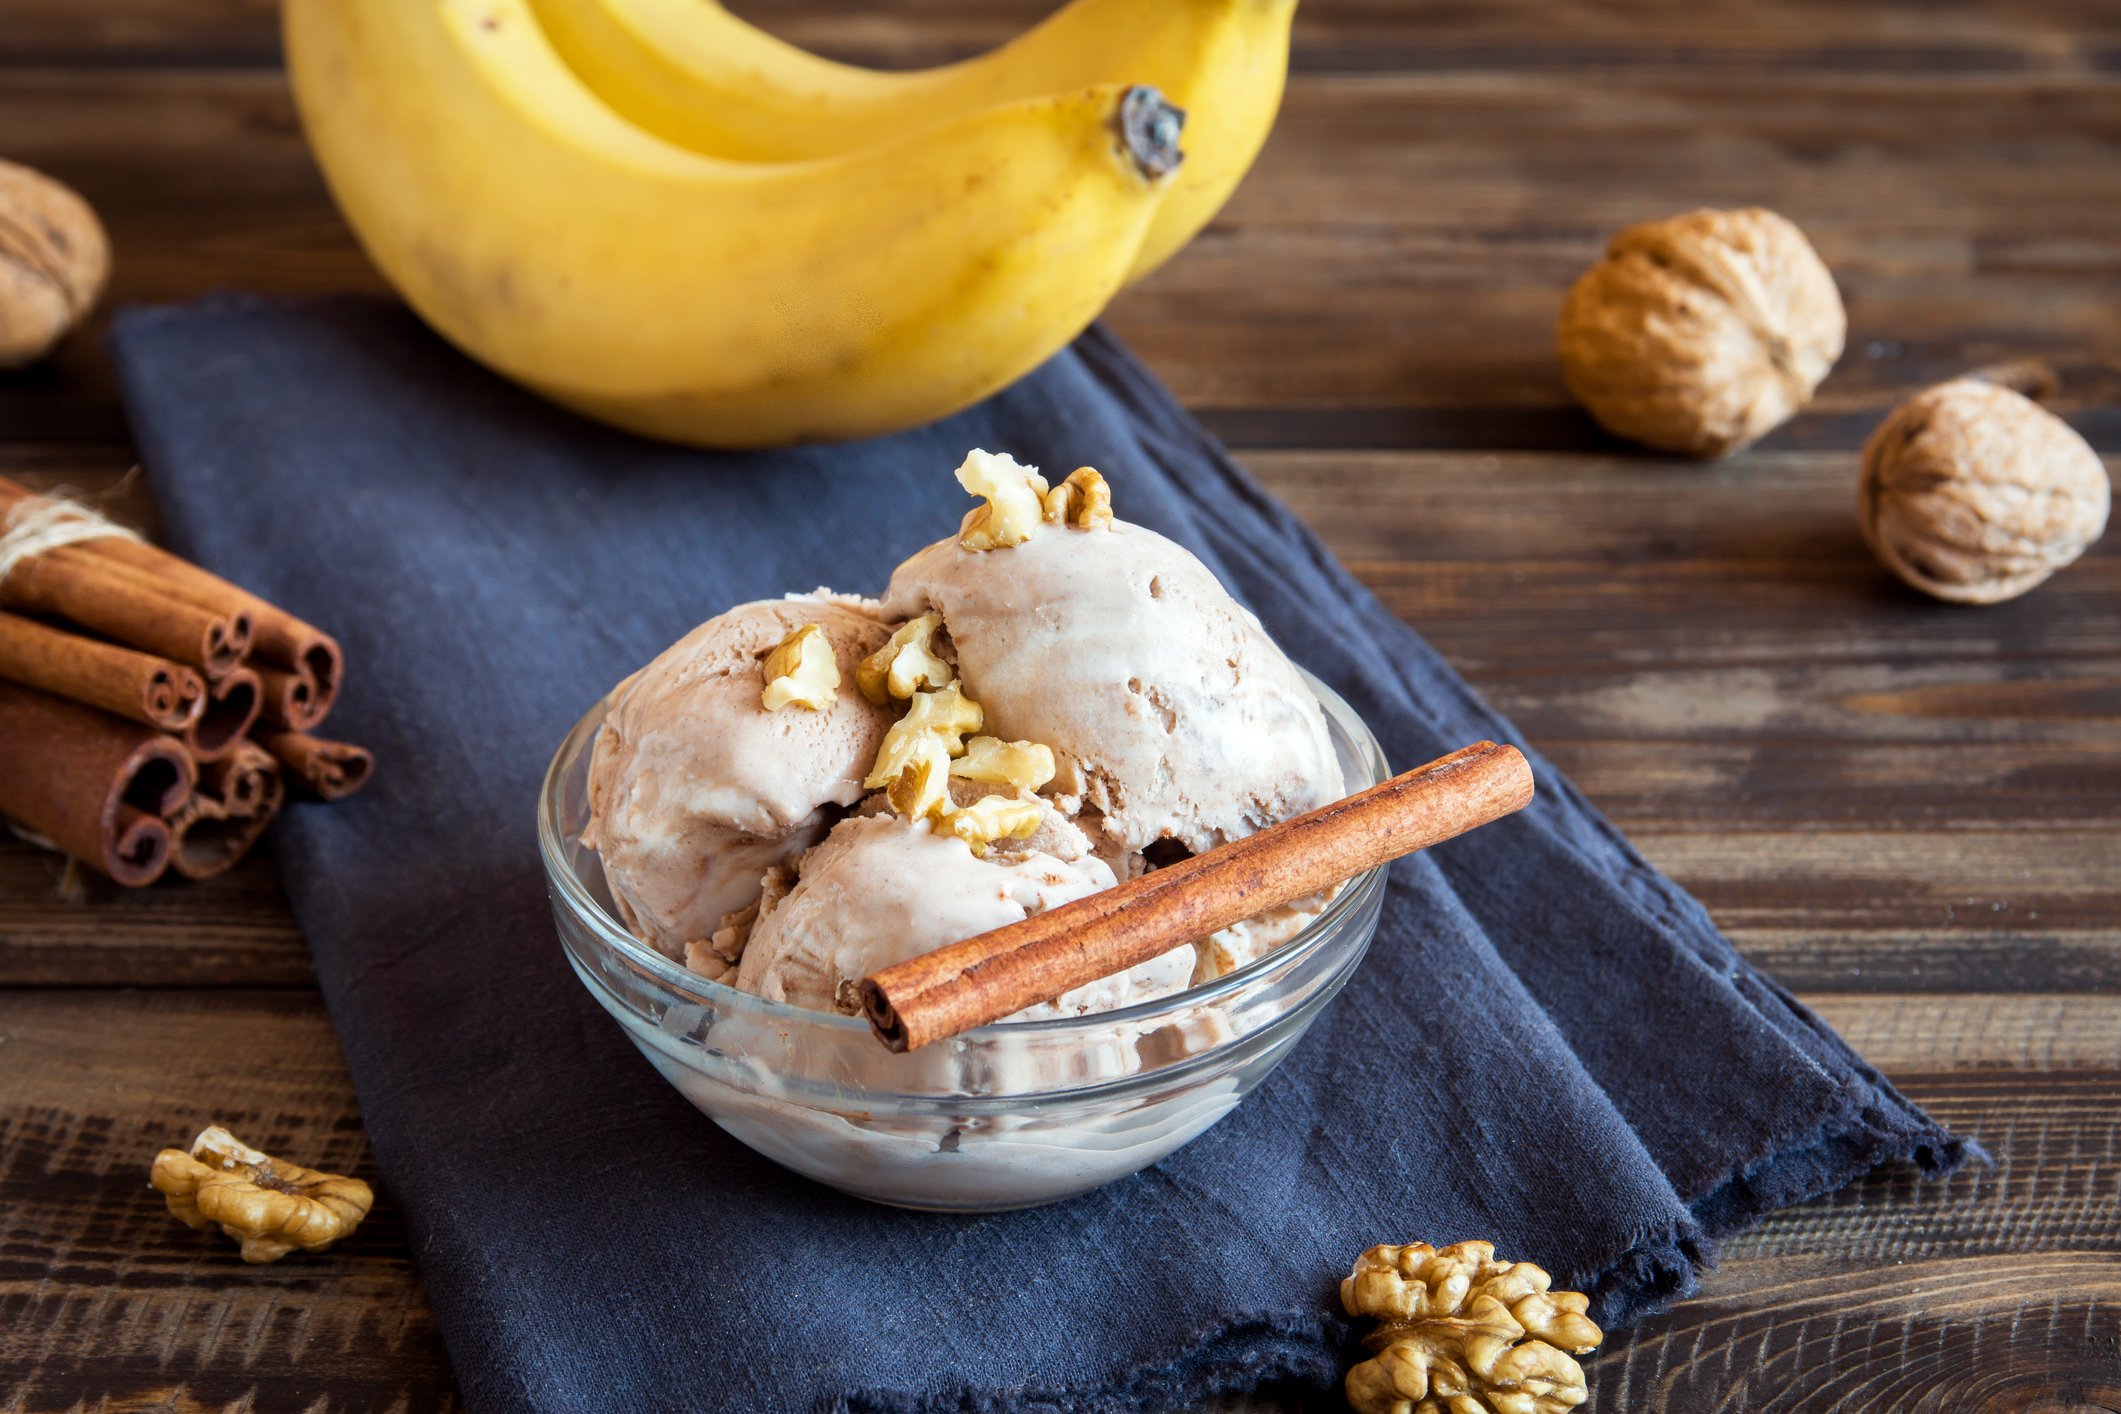 A bowl of plant-based ice cream with cinnamon nuts and bananas